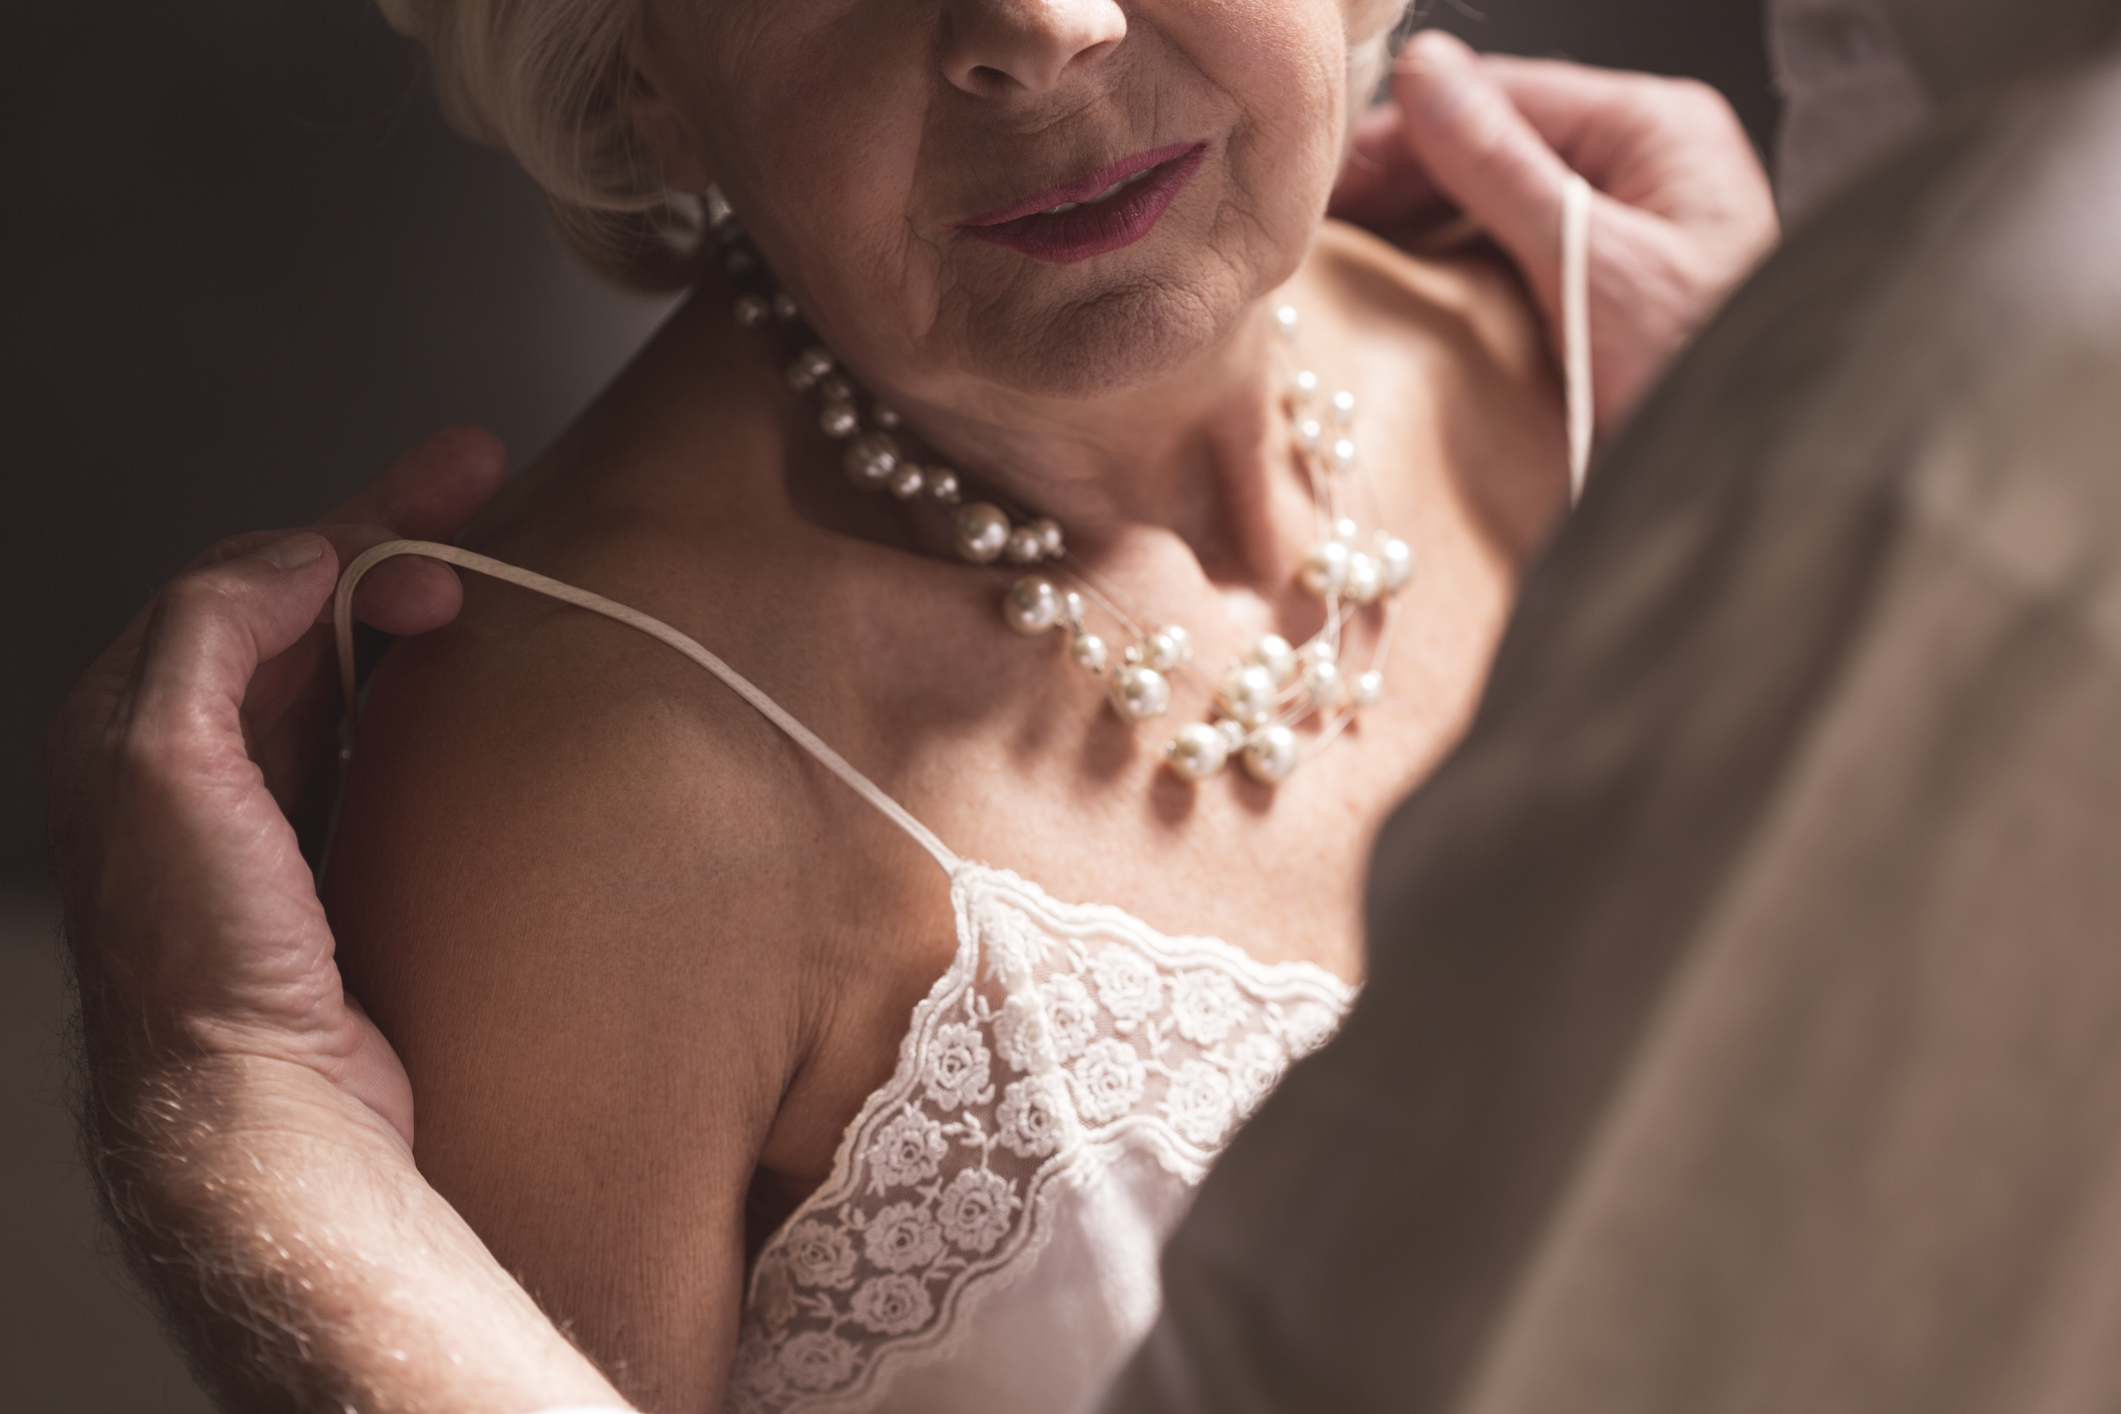 Older Adults More Likely to Have Extramarital